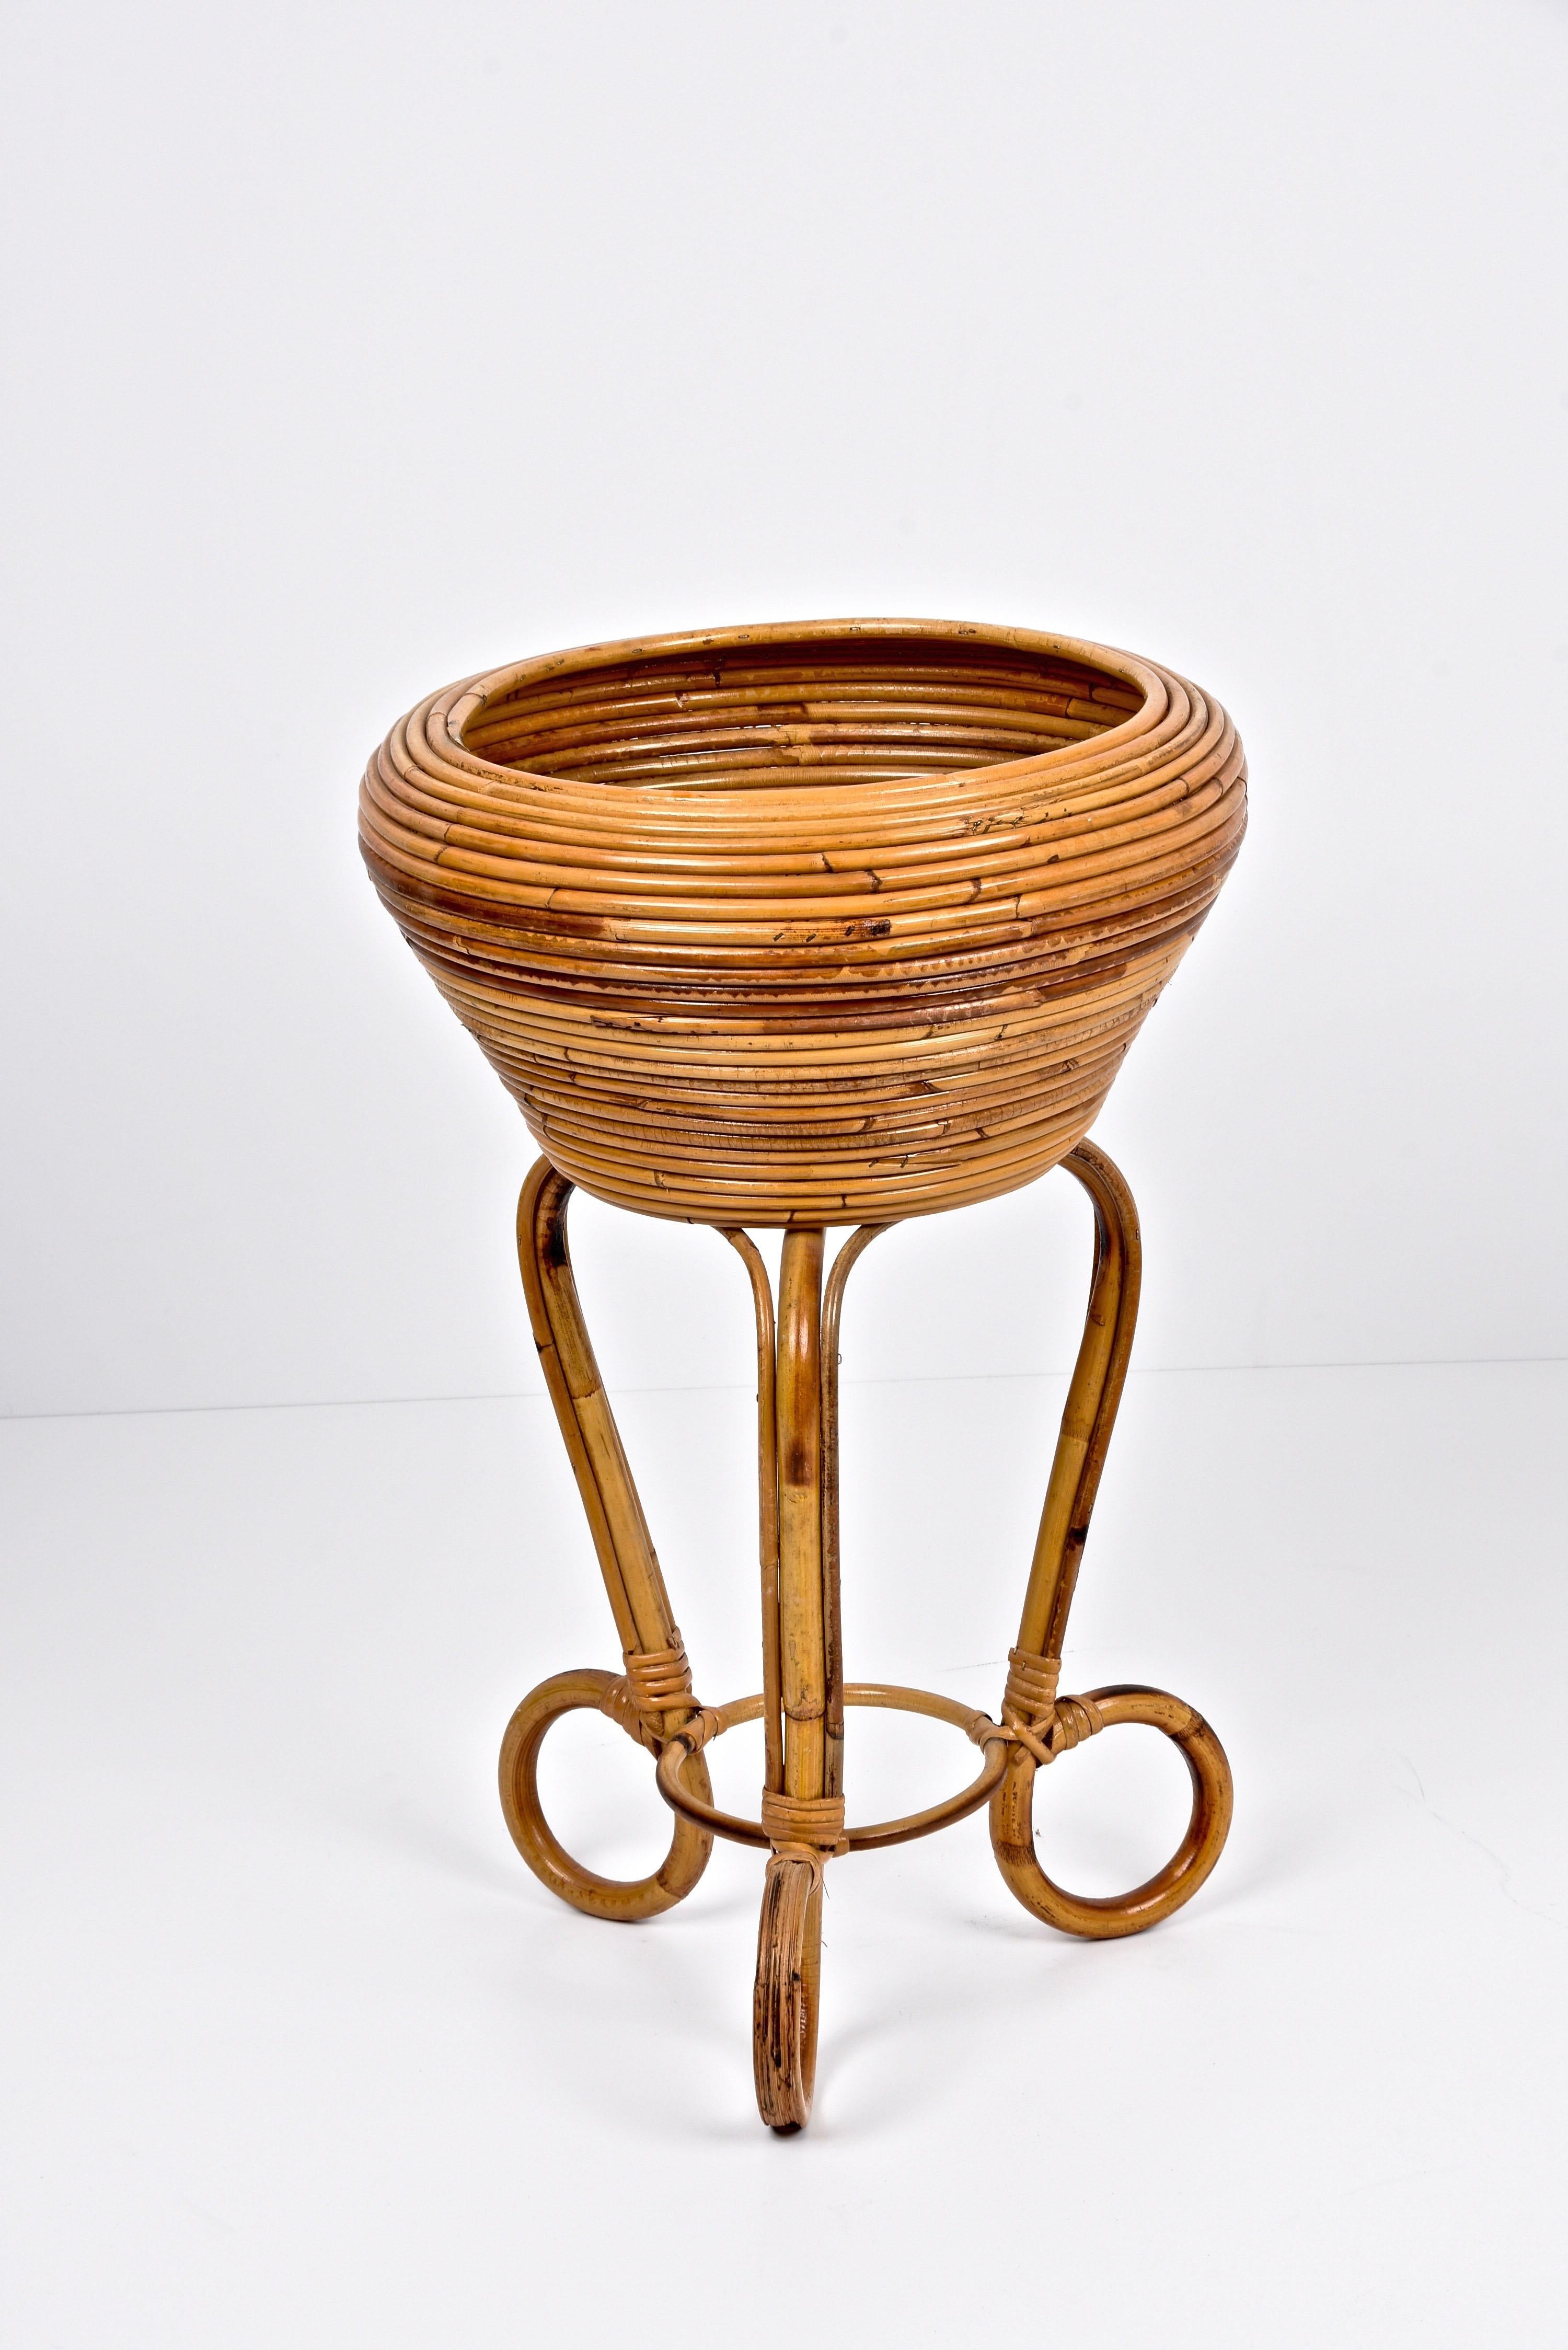 Amazing midcentury French Riviera round bamboo and rattan planter. This wonderful piece was designed in Italy during the 1960s.

This piece is amazing as the rattan body of the planter is made of concentric and round rattan, while the feet are